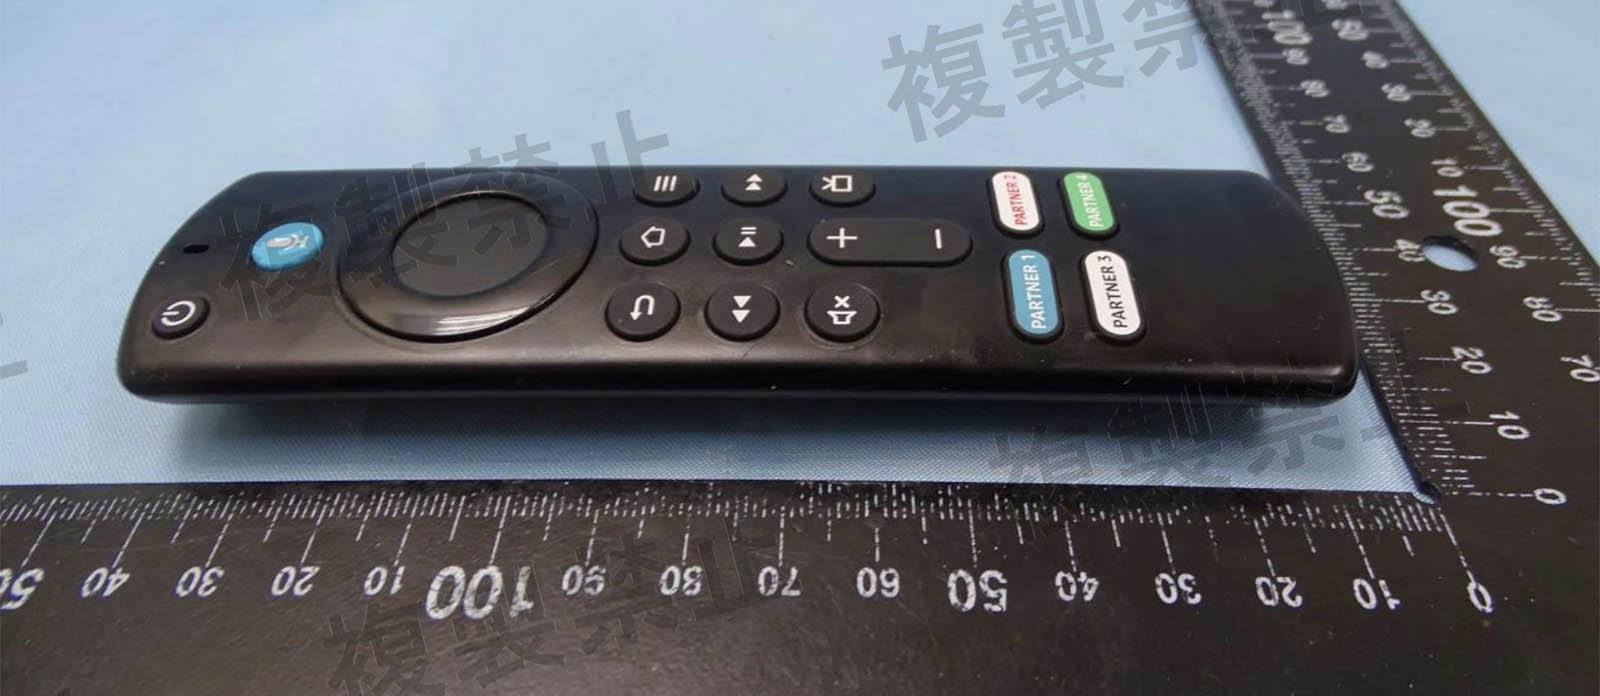 New Device Listings Hint at Possible New Fire TV Remote